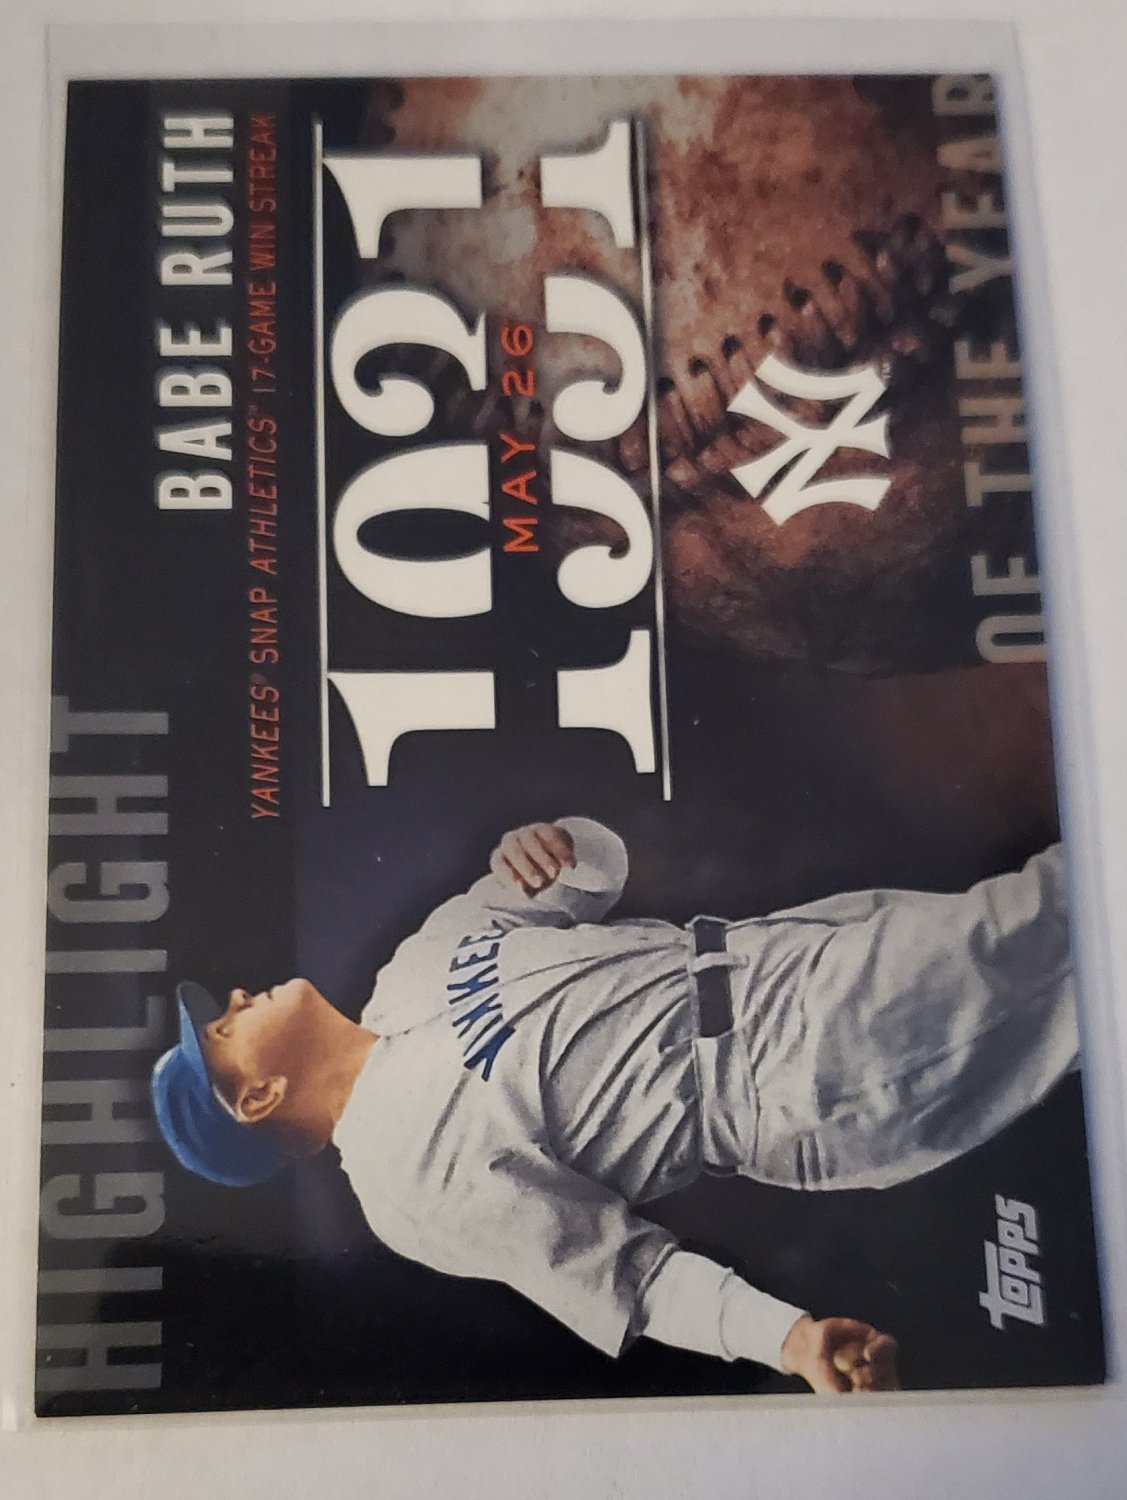 Babe Ruth 2015 Topps Highlight Of The Year Insert Card